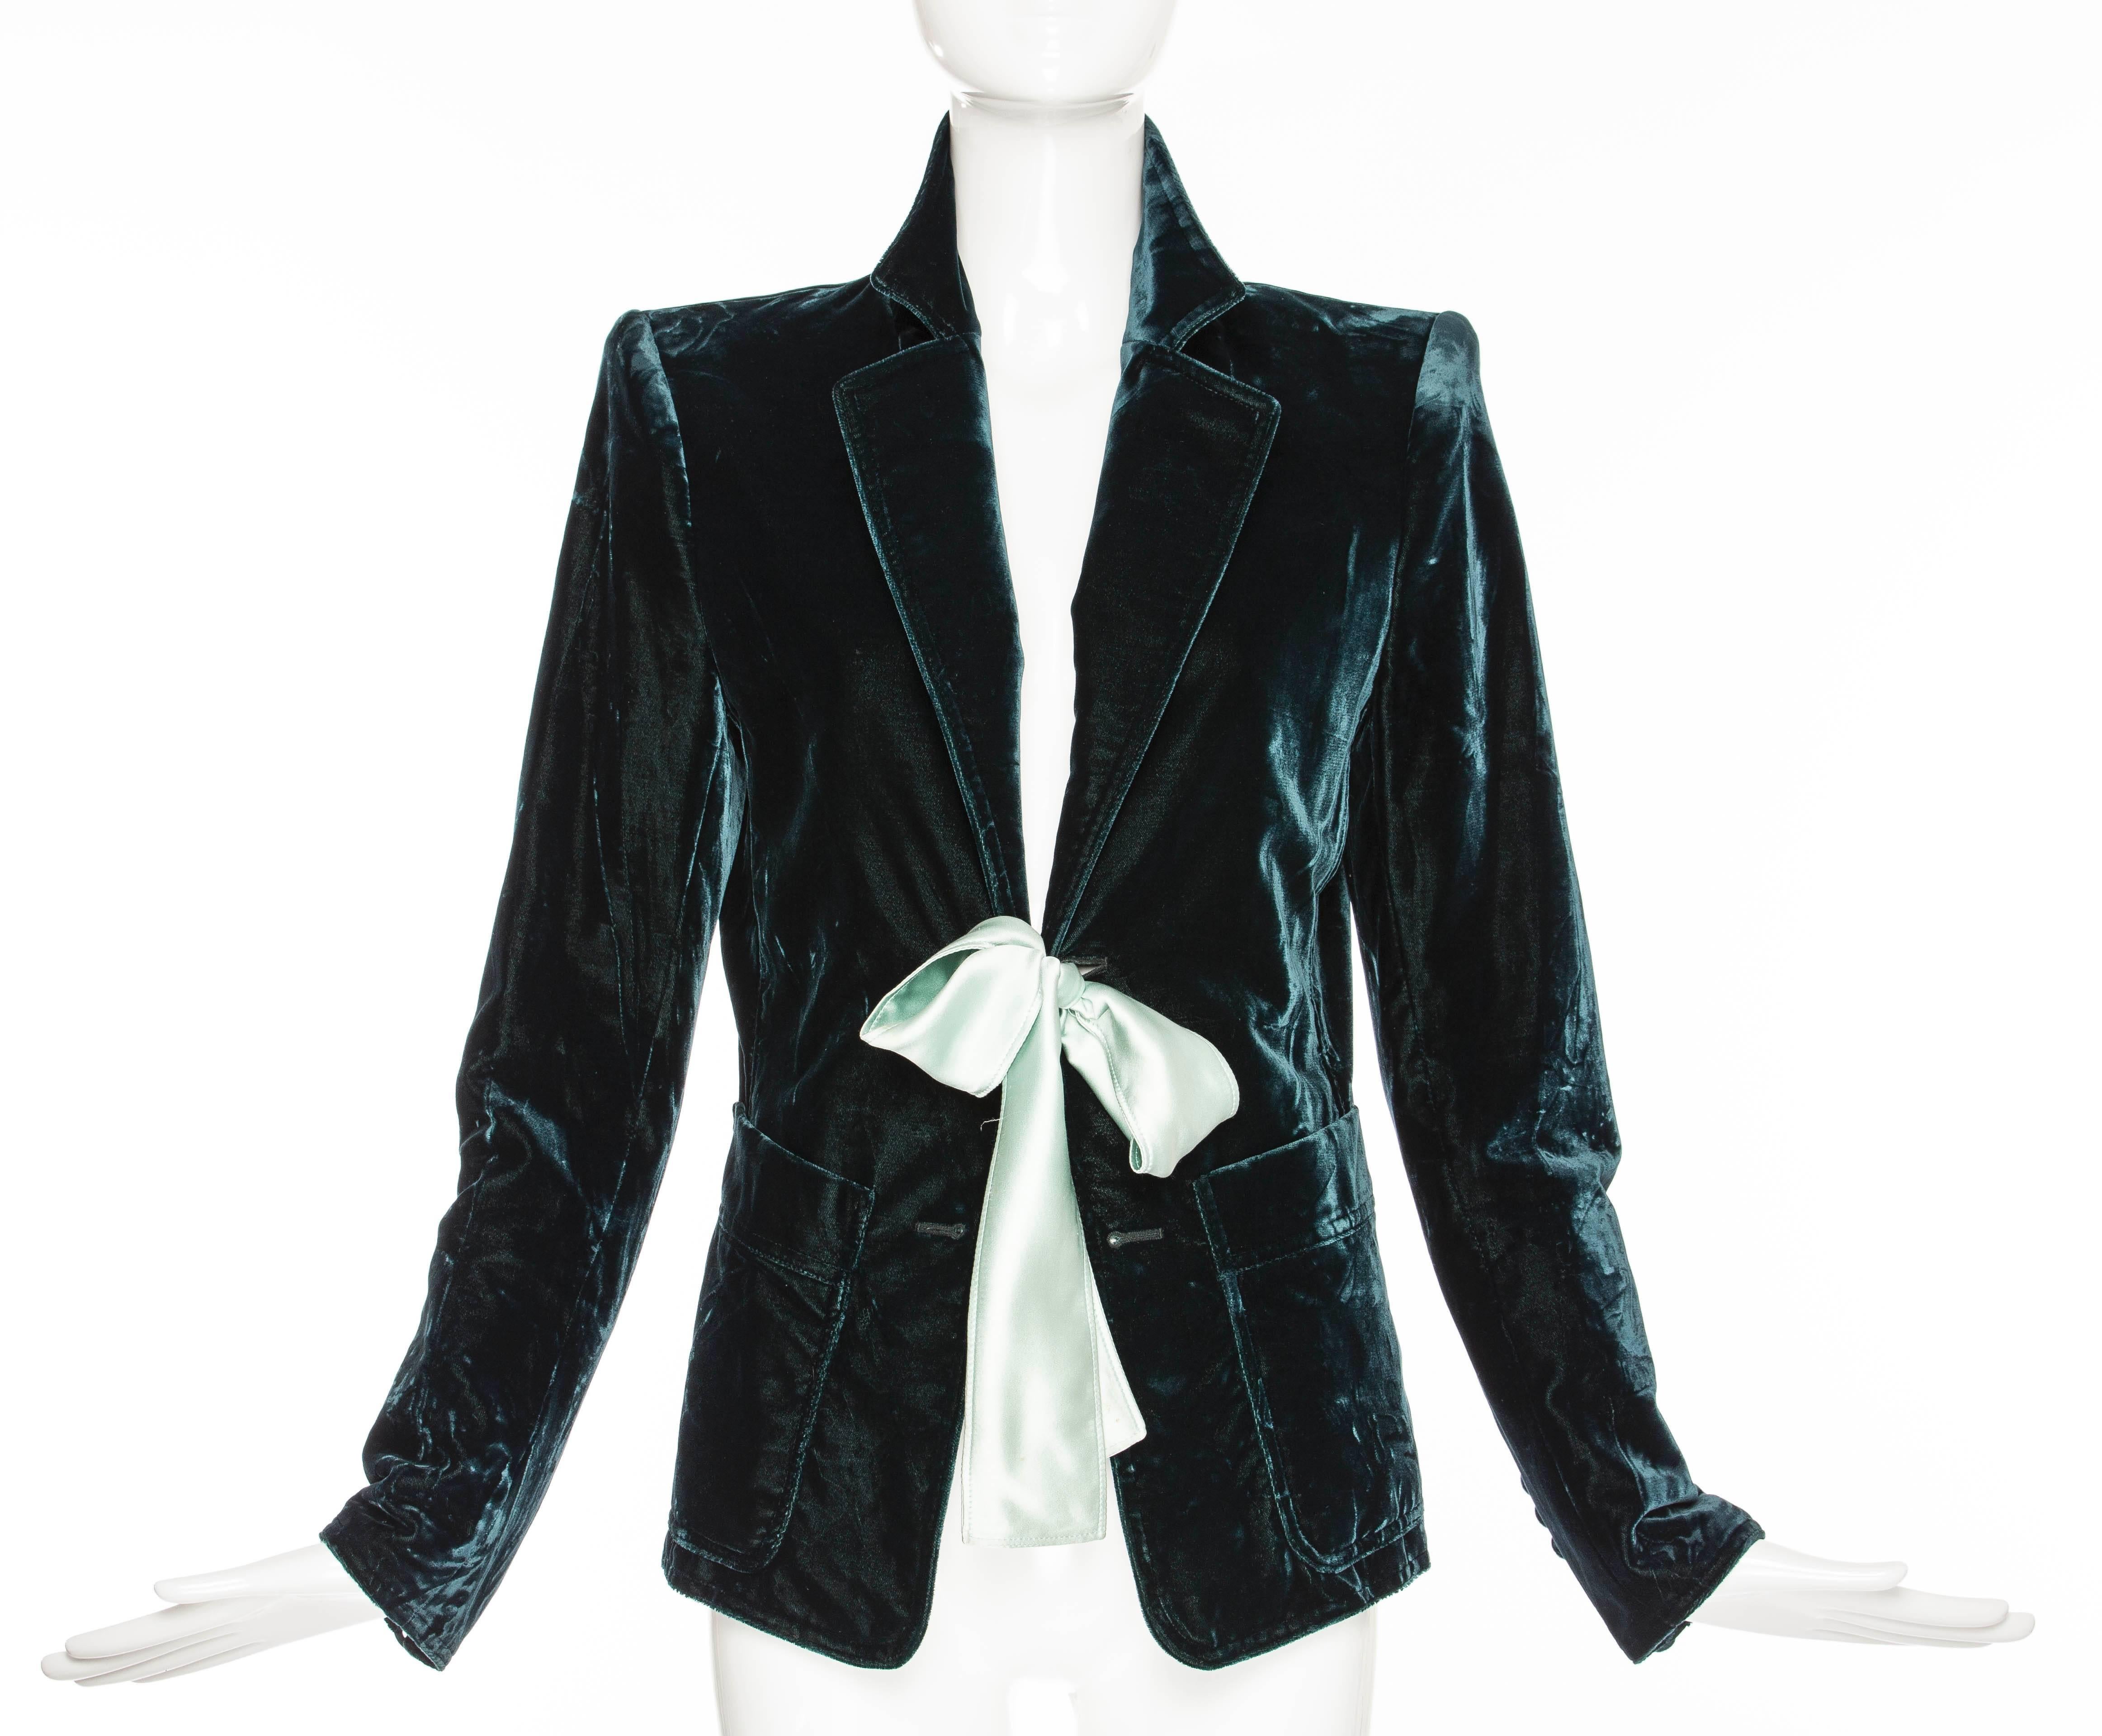 Tom Ford for Yves Saint Laurent emerald green velvet, long sleeve blazer with notched lapels, dual front patch pockets and satin sash-tie closure at waist.

FR.40
US. 8

Bust 36